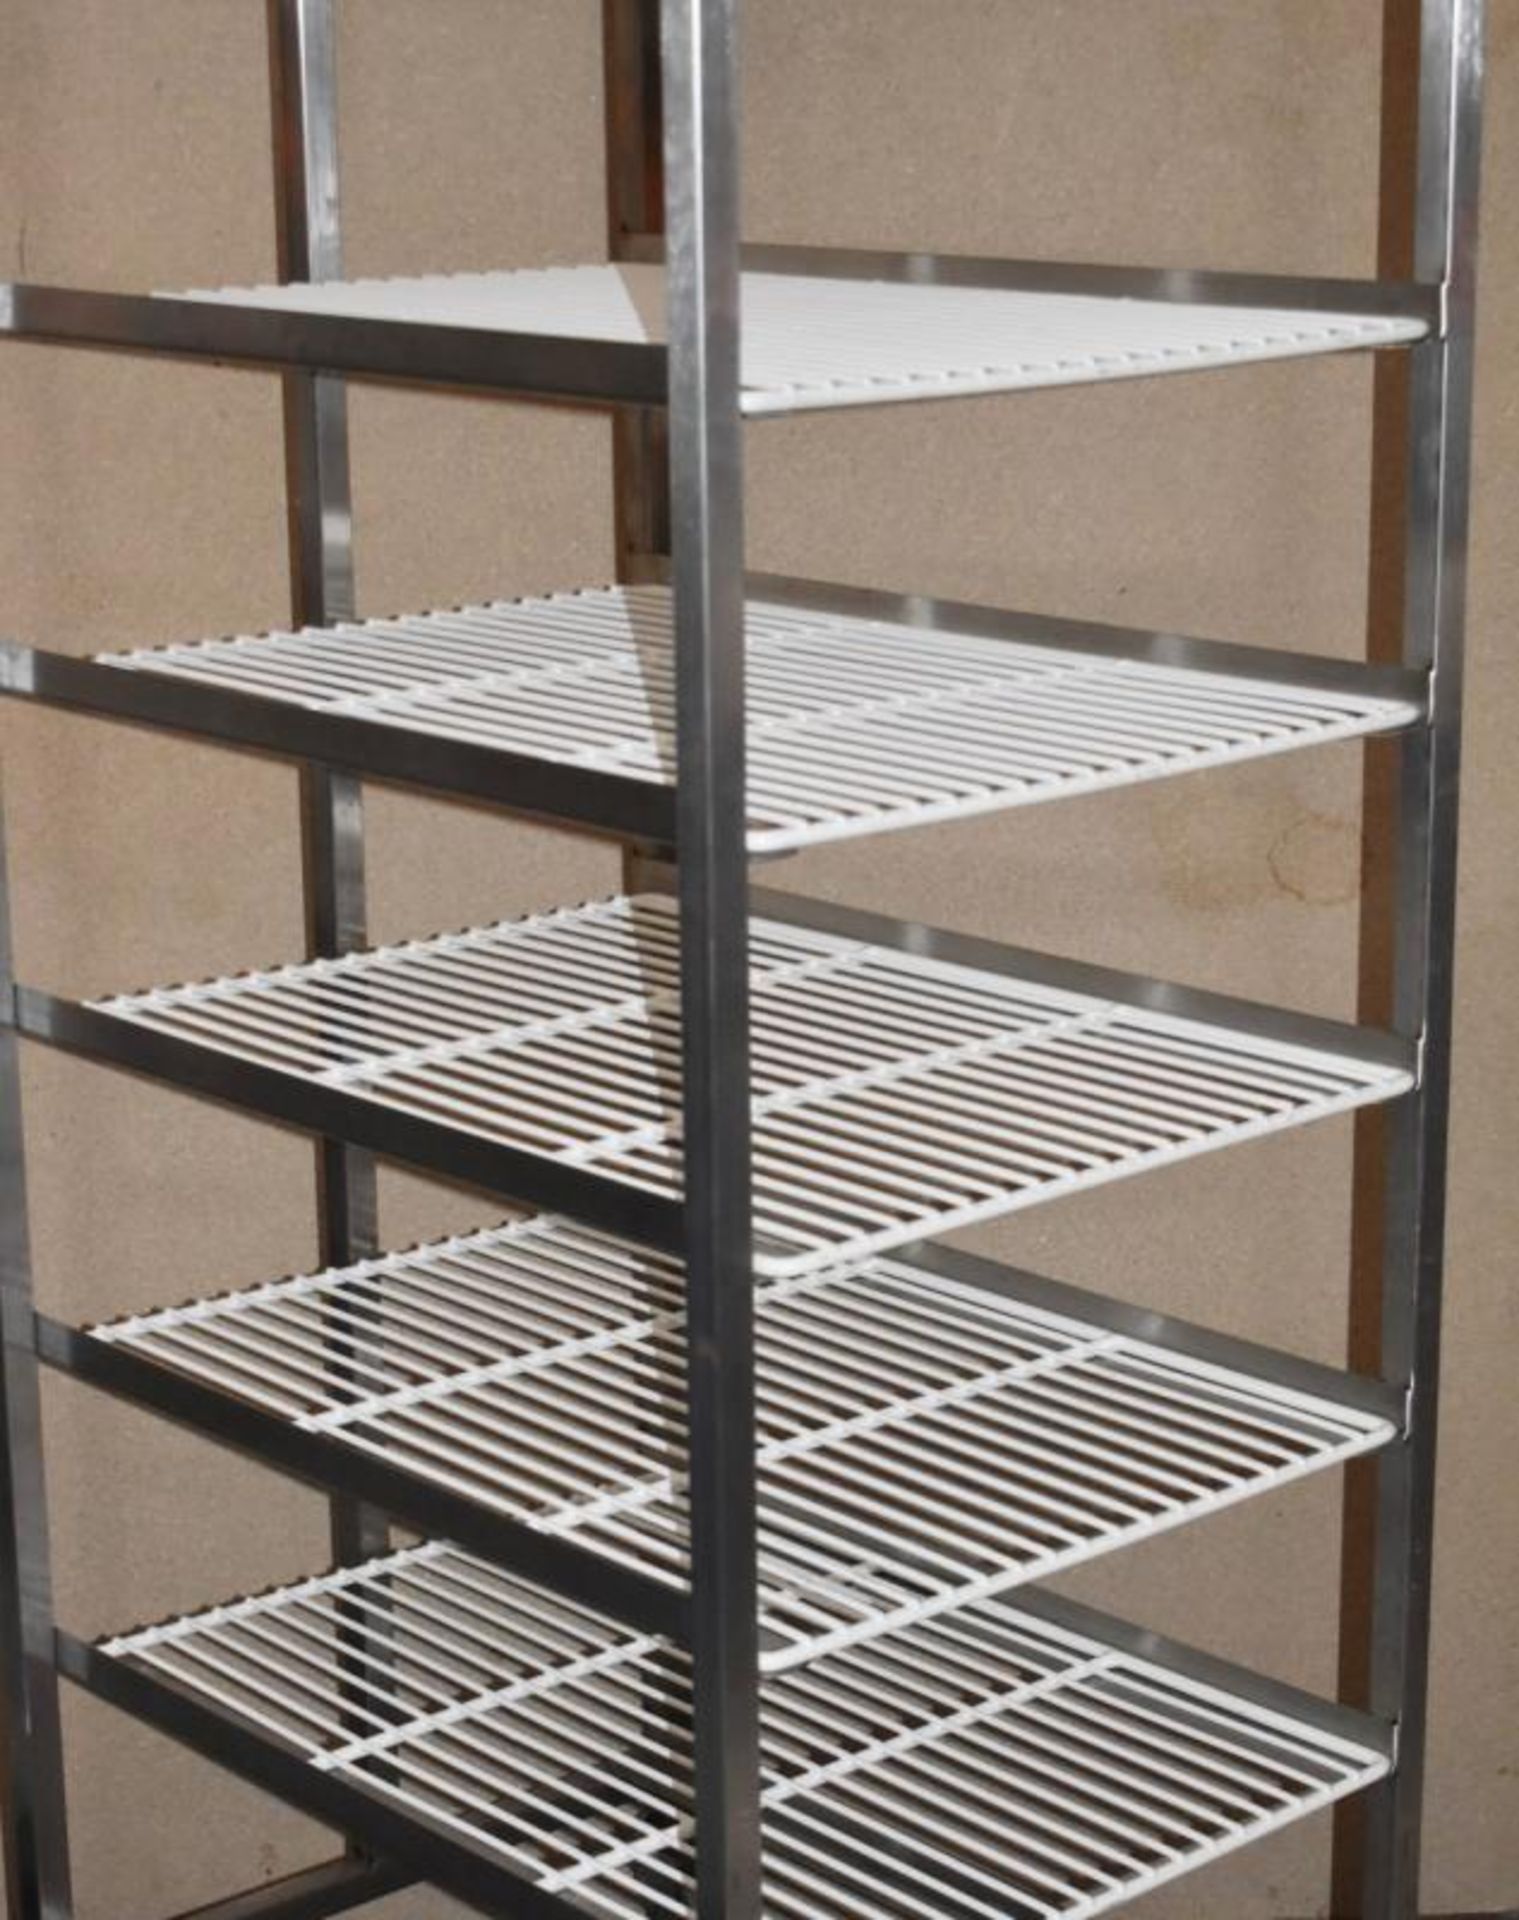 1 x Stainless Steel 8 Tier Mobile Shelf Unit For Commercial Kitchens With White Coated Wire Shelves - Image 5 of 11